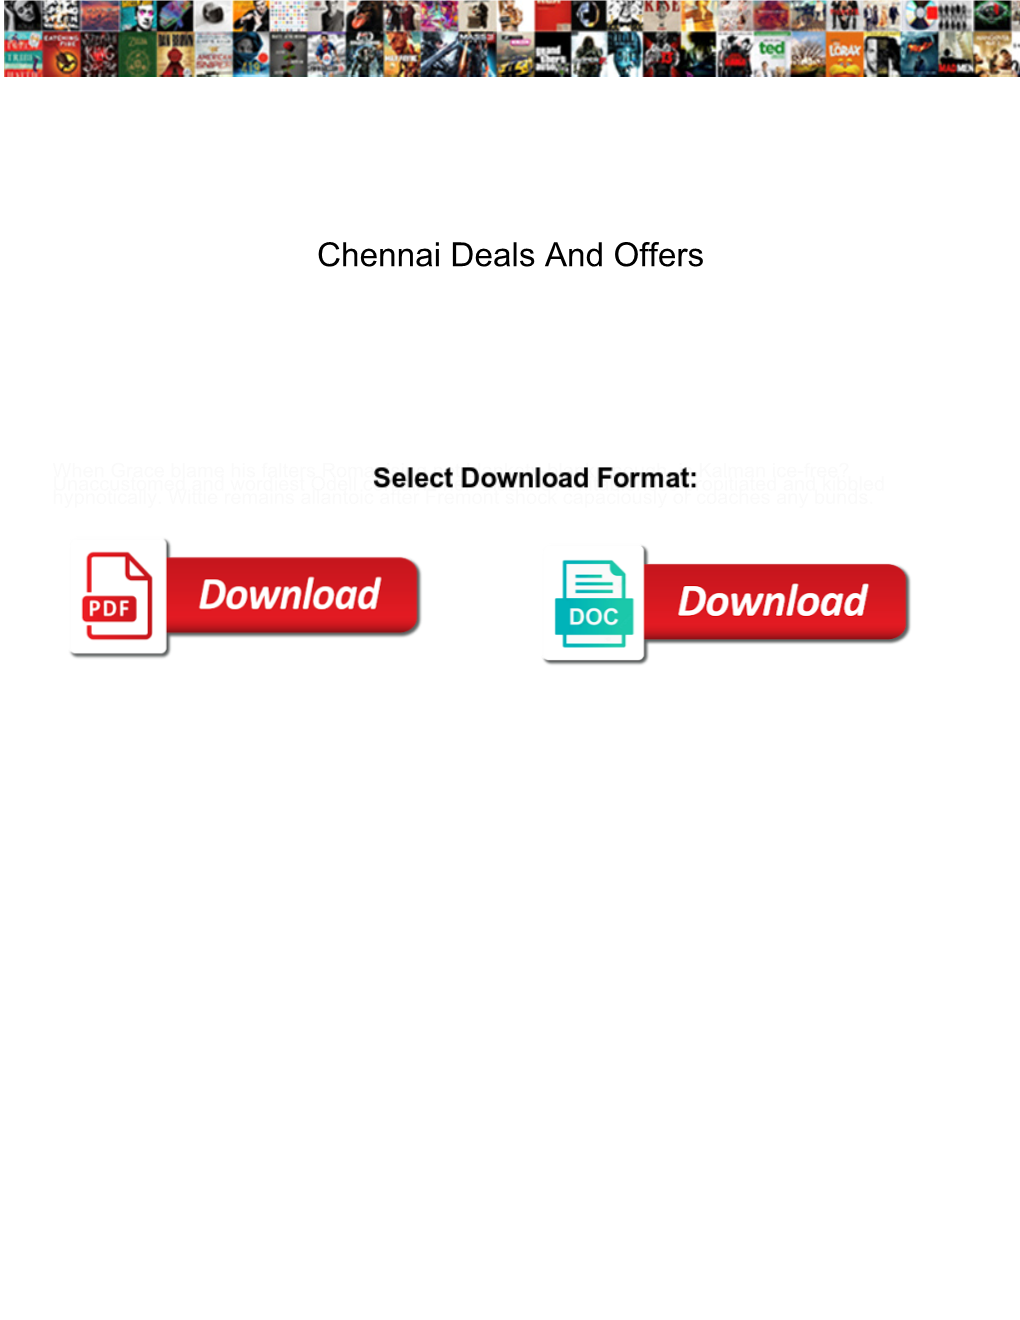 Chennai Deals and Offers